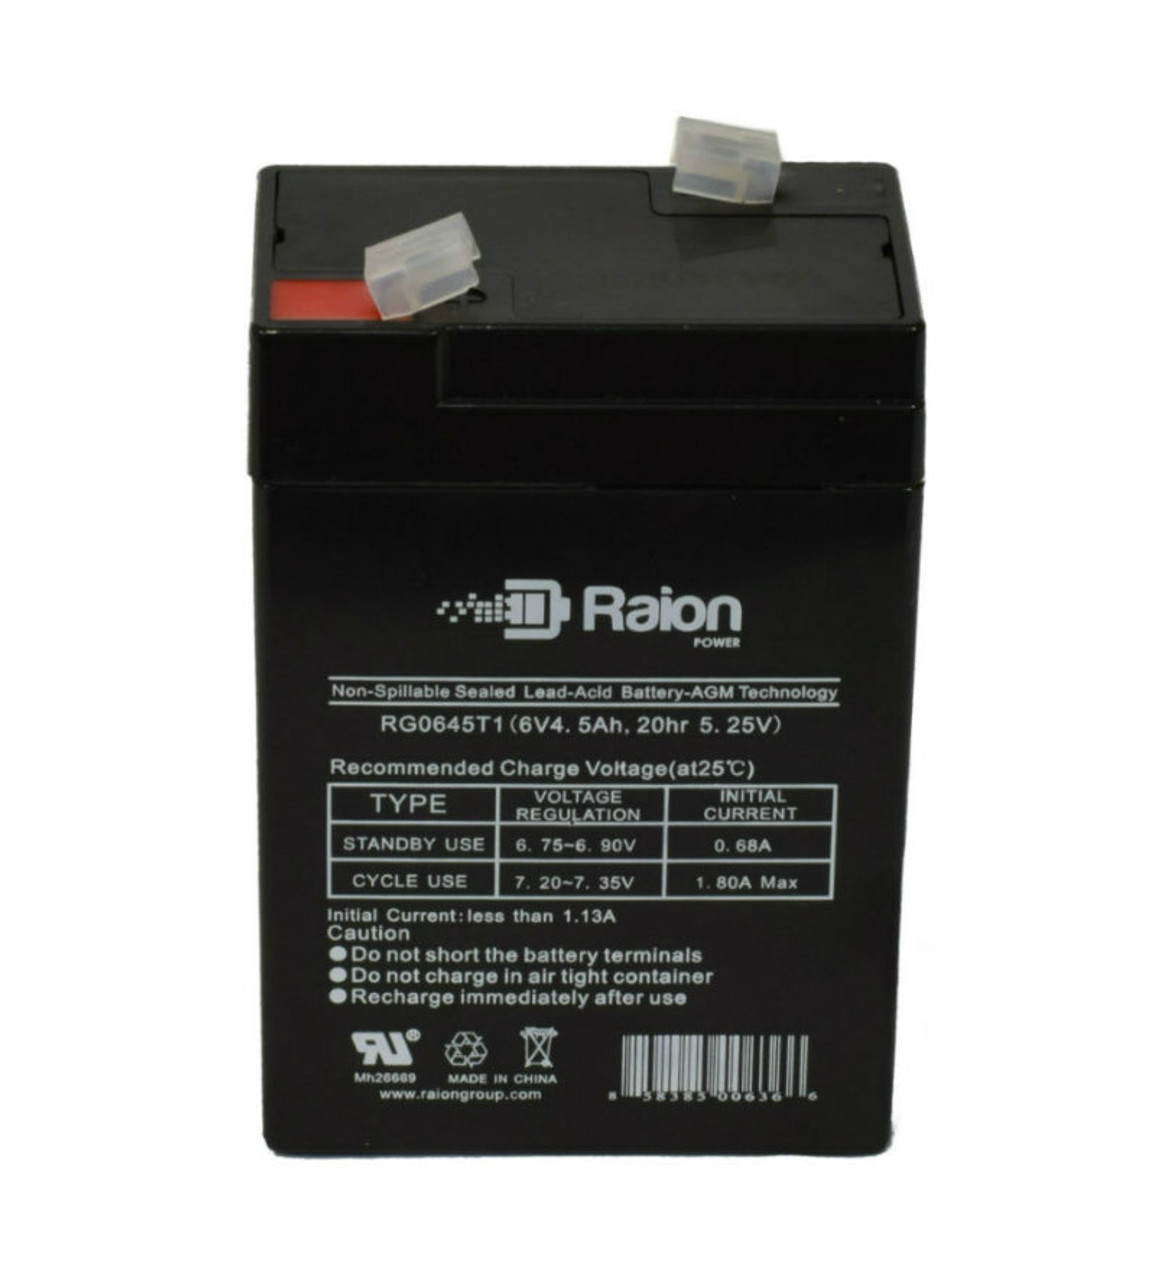 Raion Power RG0645T1 Replacement Battery Cartridge for Remco RM6-4R25